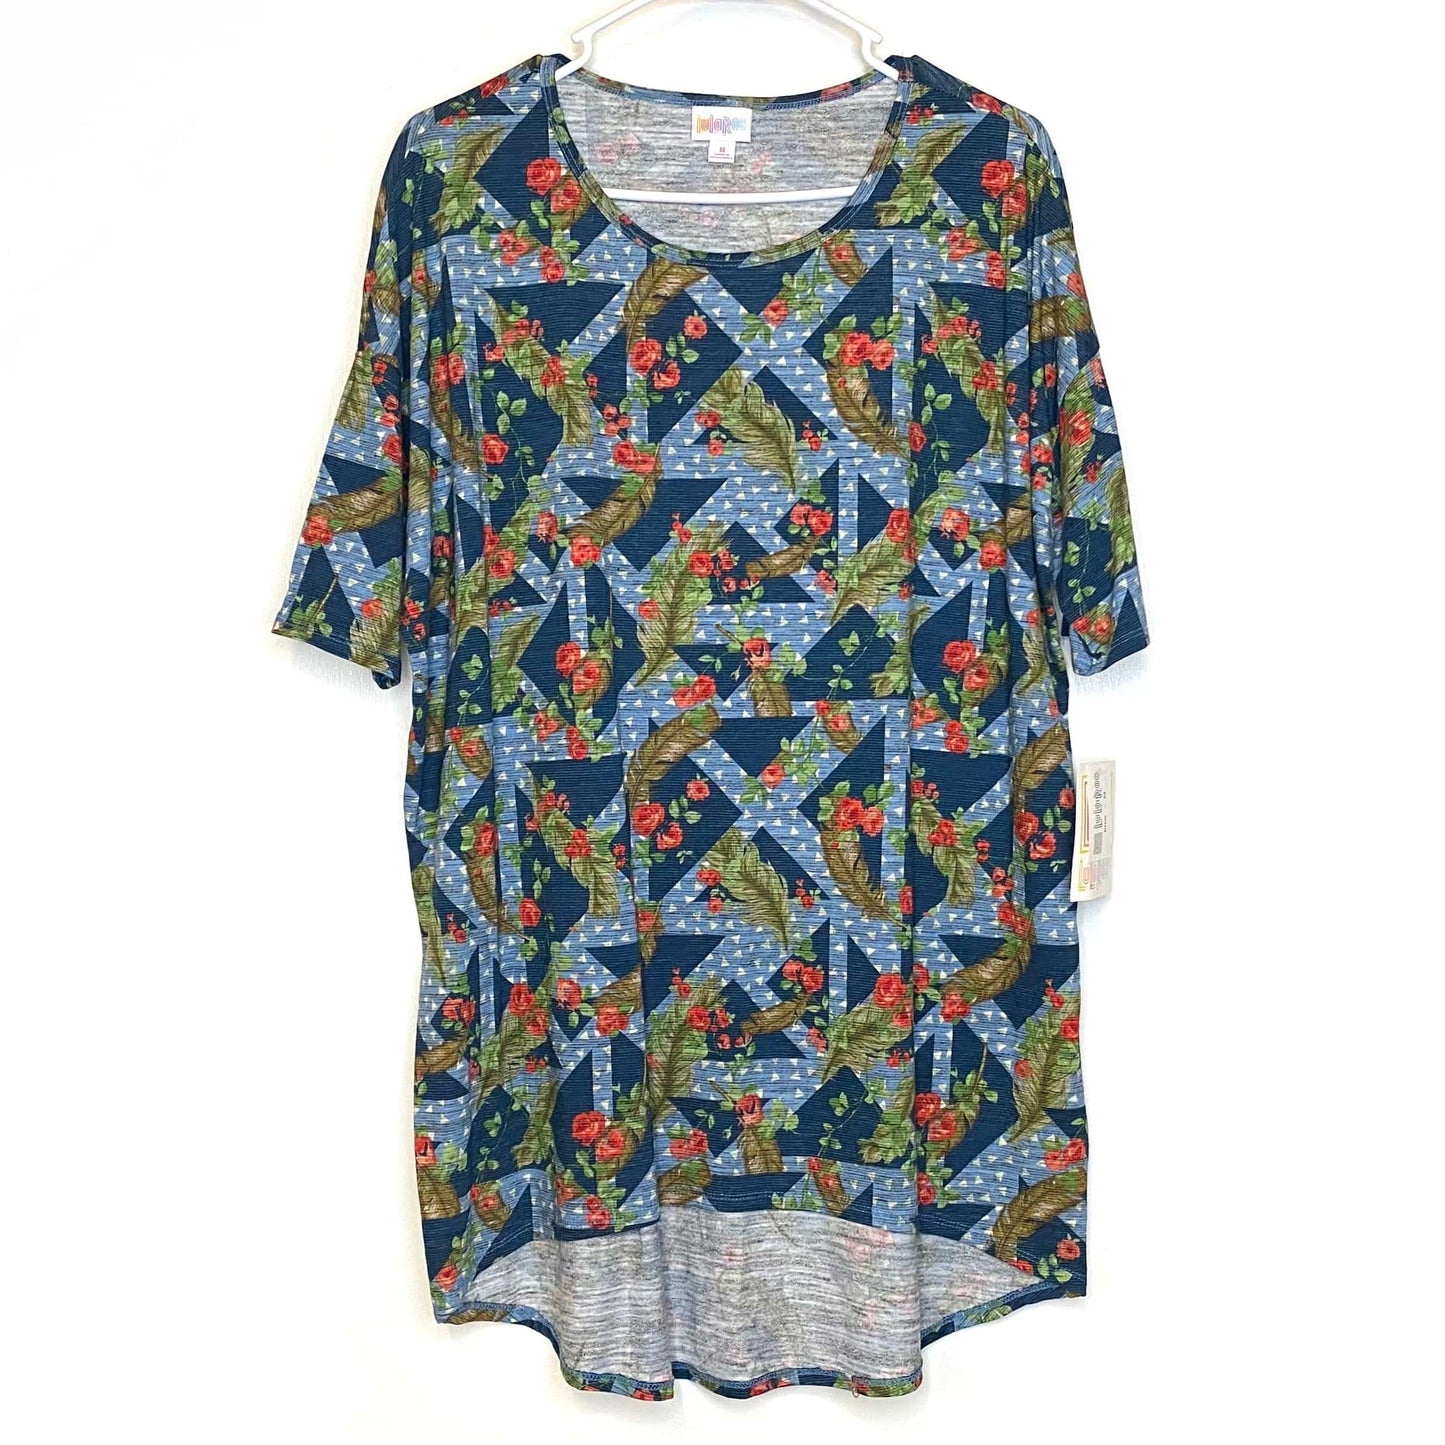 LuLaRoe Womens M Irma Blue Floral/Triangles Pattern S/s Tunic Top NWT